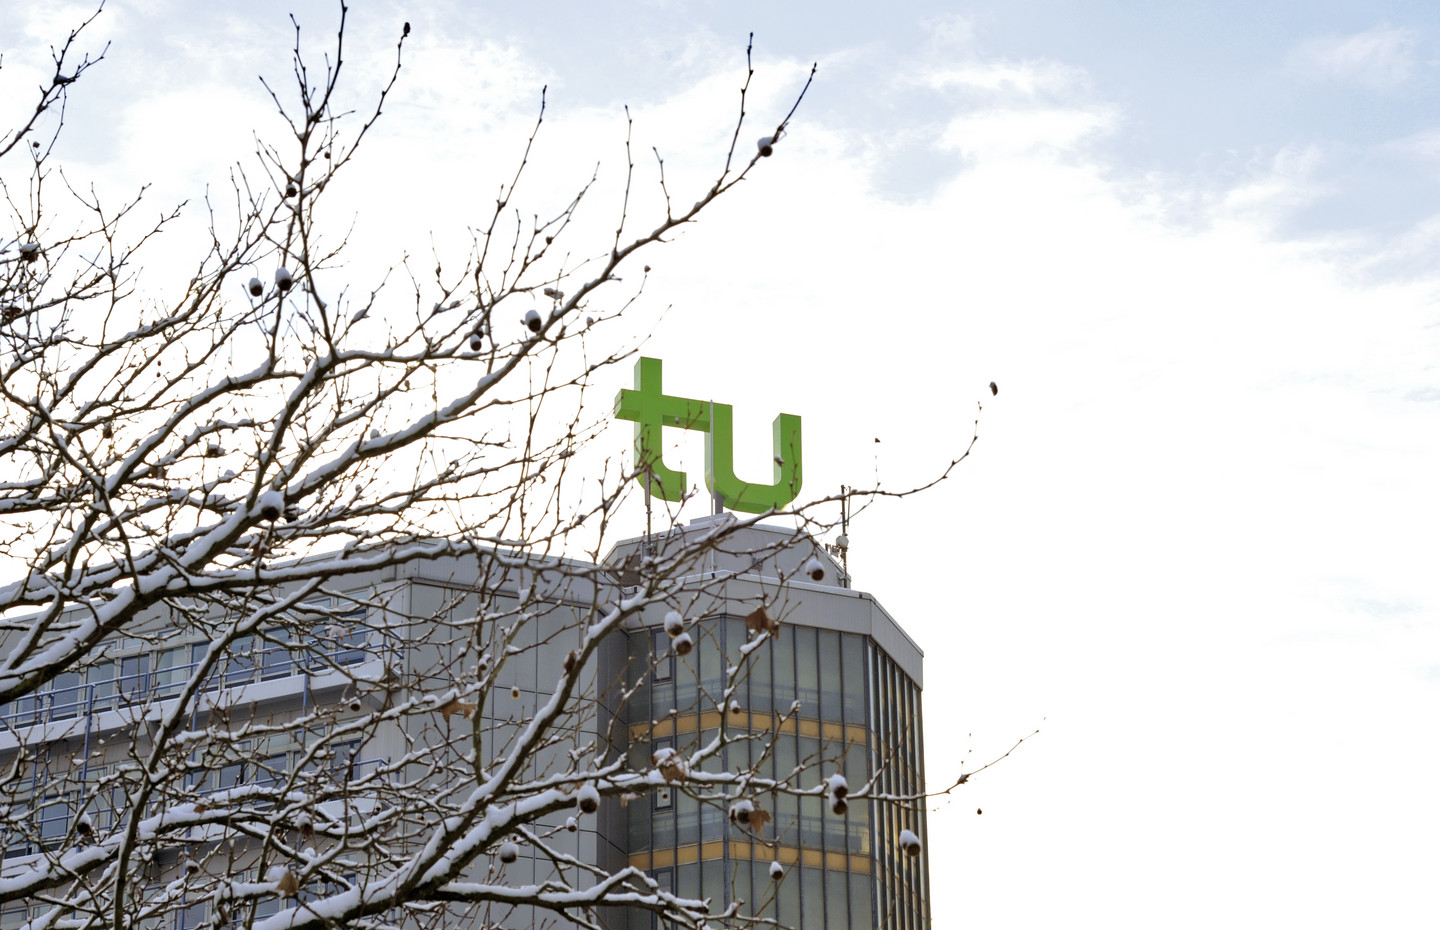 The top of the math tower building with the green TU logo on a clear winter day. On the left half of the photo, you can see branches of a tree covered by snow.